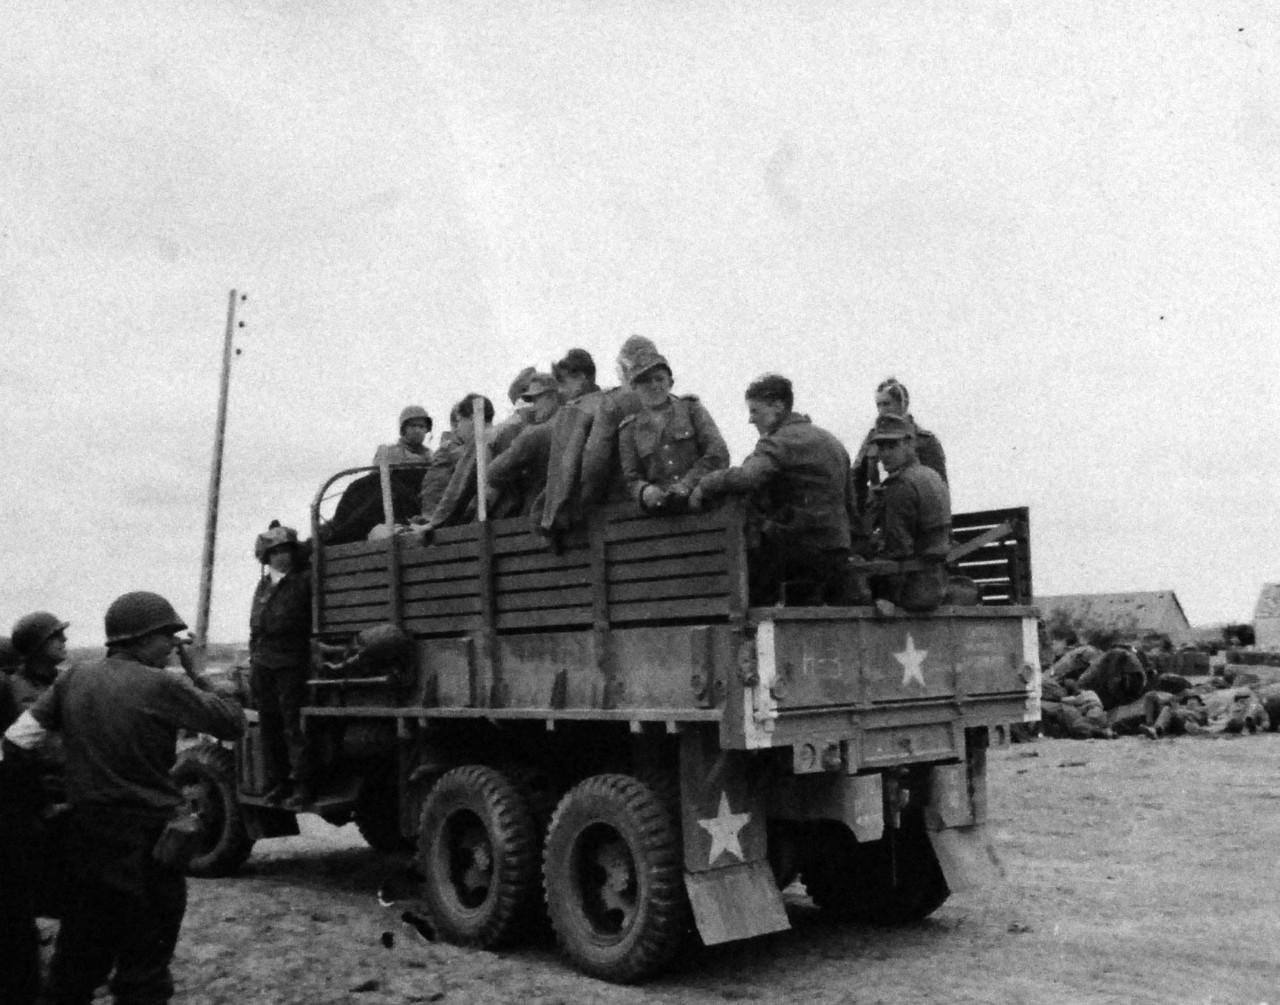 80-G-252668:   Normandy Invasion, German Prisoners, June 1944.  German prisoners captured by Airborne Division in truck on French Beach, 8 June 1944.   Official U.S. Navy Photograph, now in the collections of the National Archives.   (2014/10/28). 